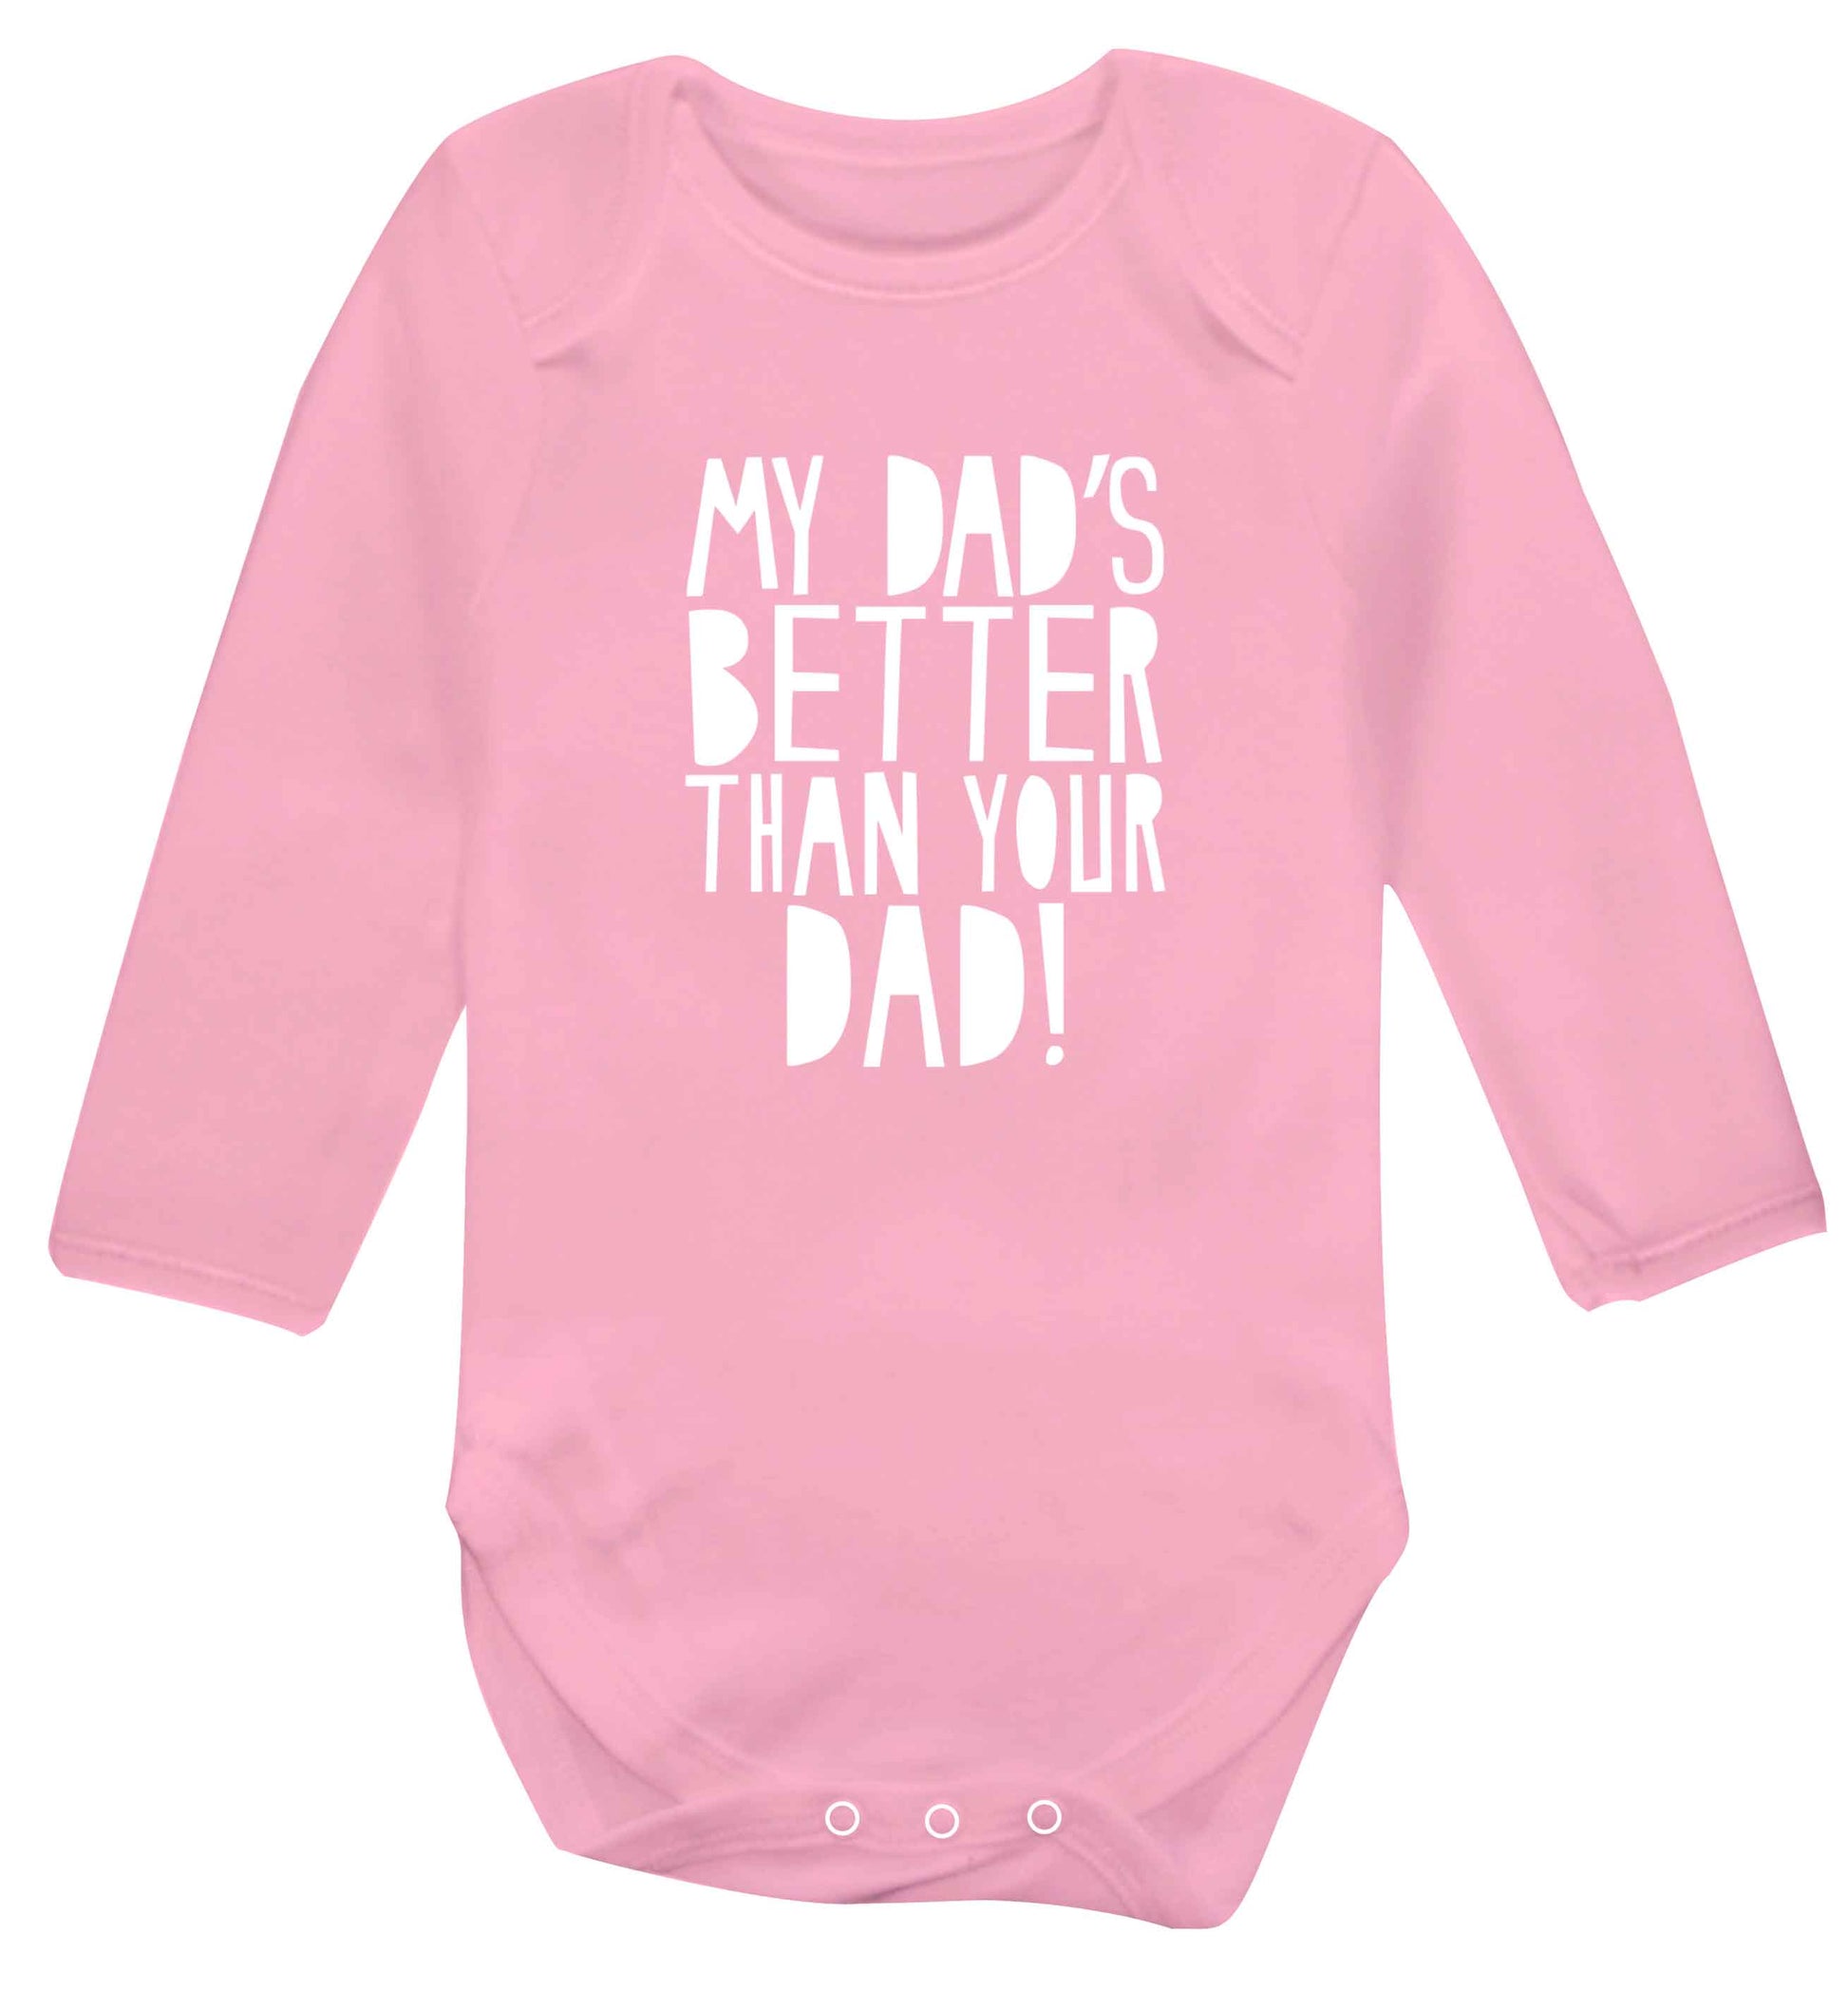 My dad's better than your dad! baby vest long sleeved pale pink 6-12 months